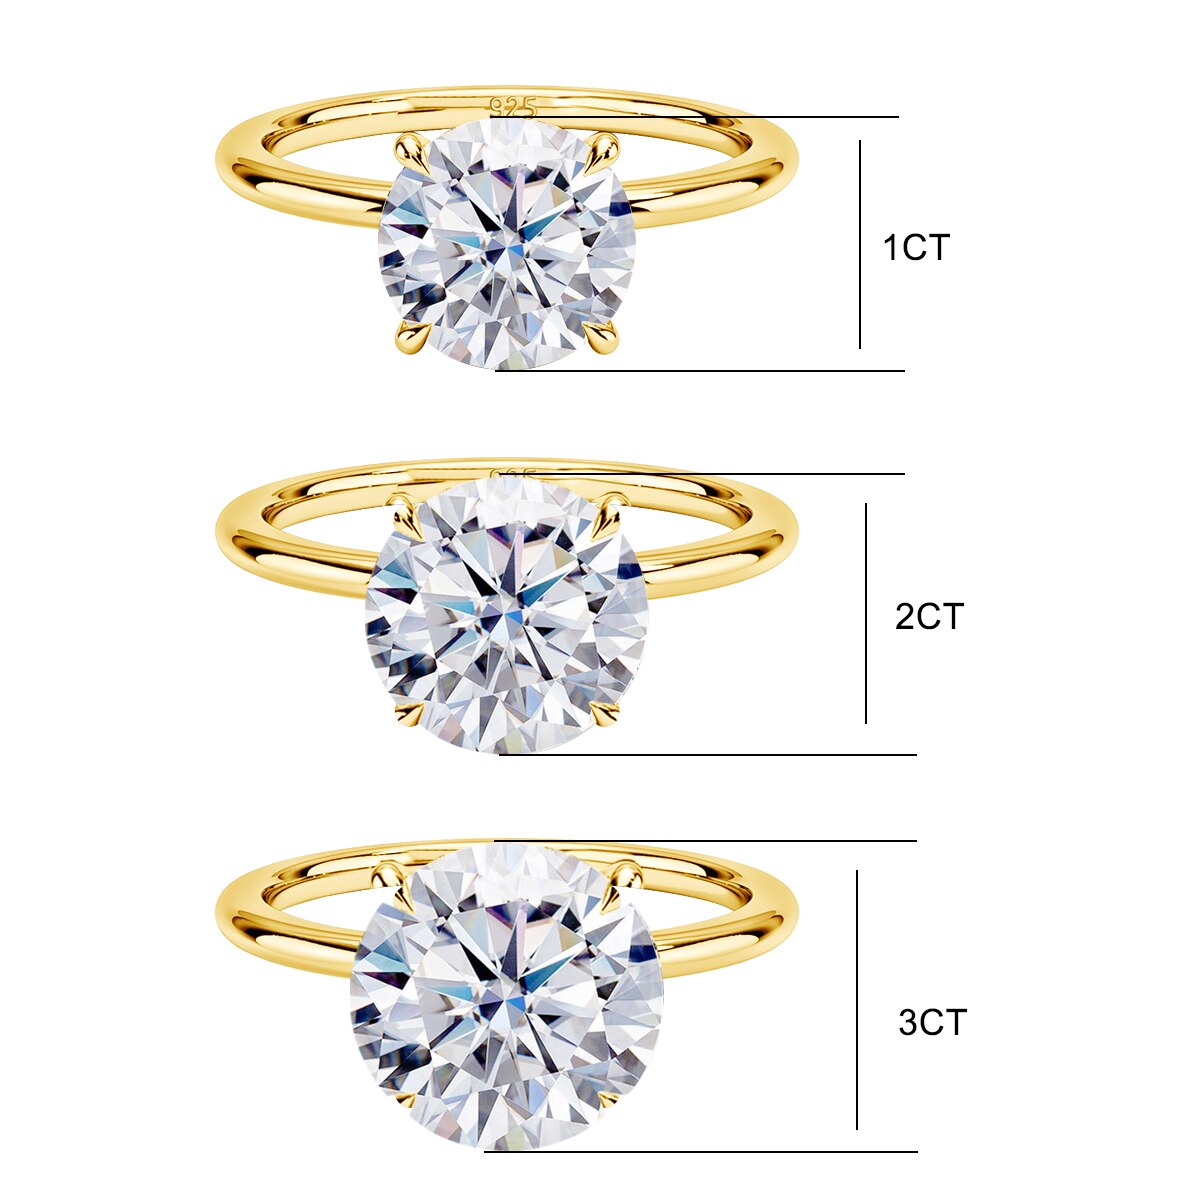 1ct / 2ct / 3ct Round Cut Solitaire Moissanite Diamond Ring 10K Gold, 14K Gold or 925 Sterling Silver